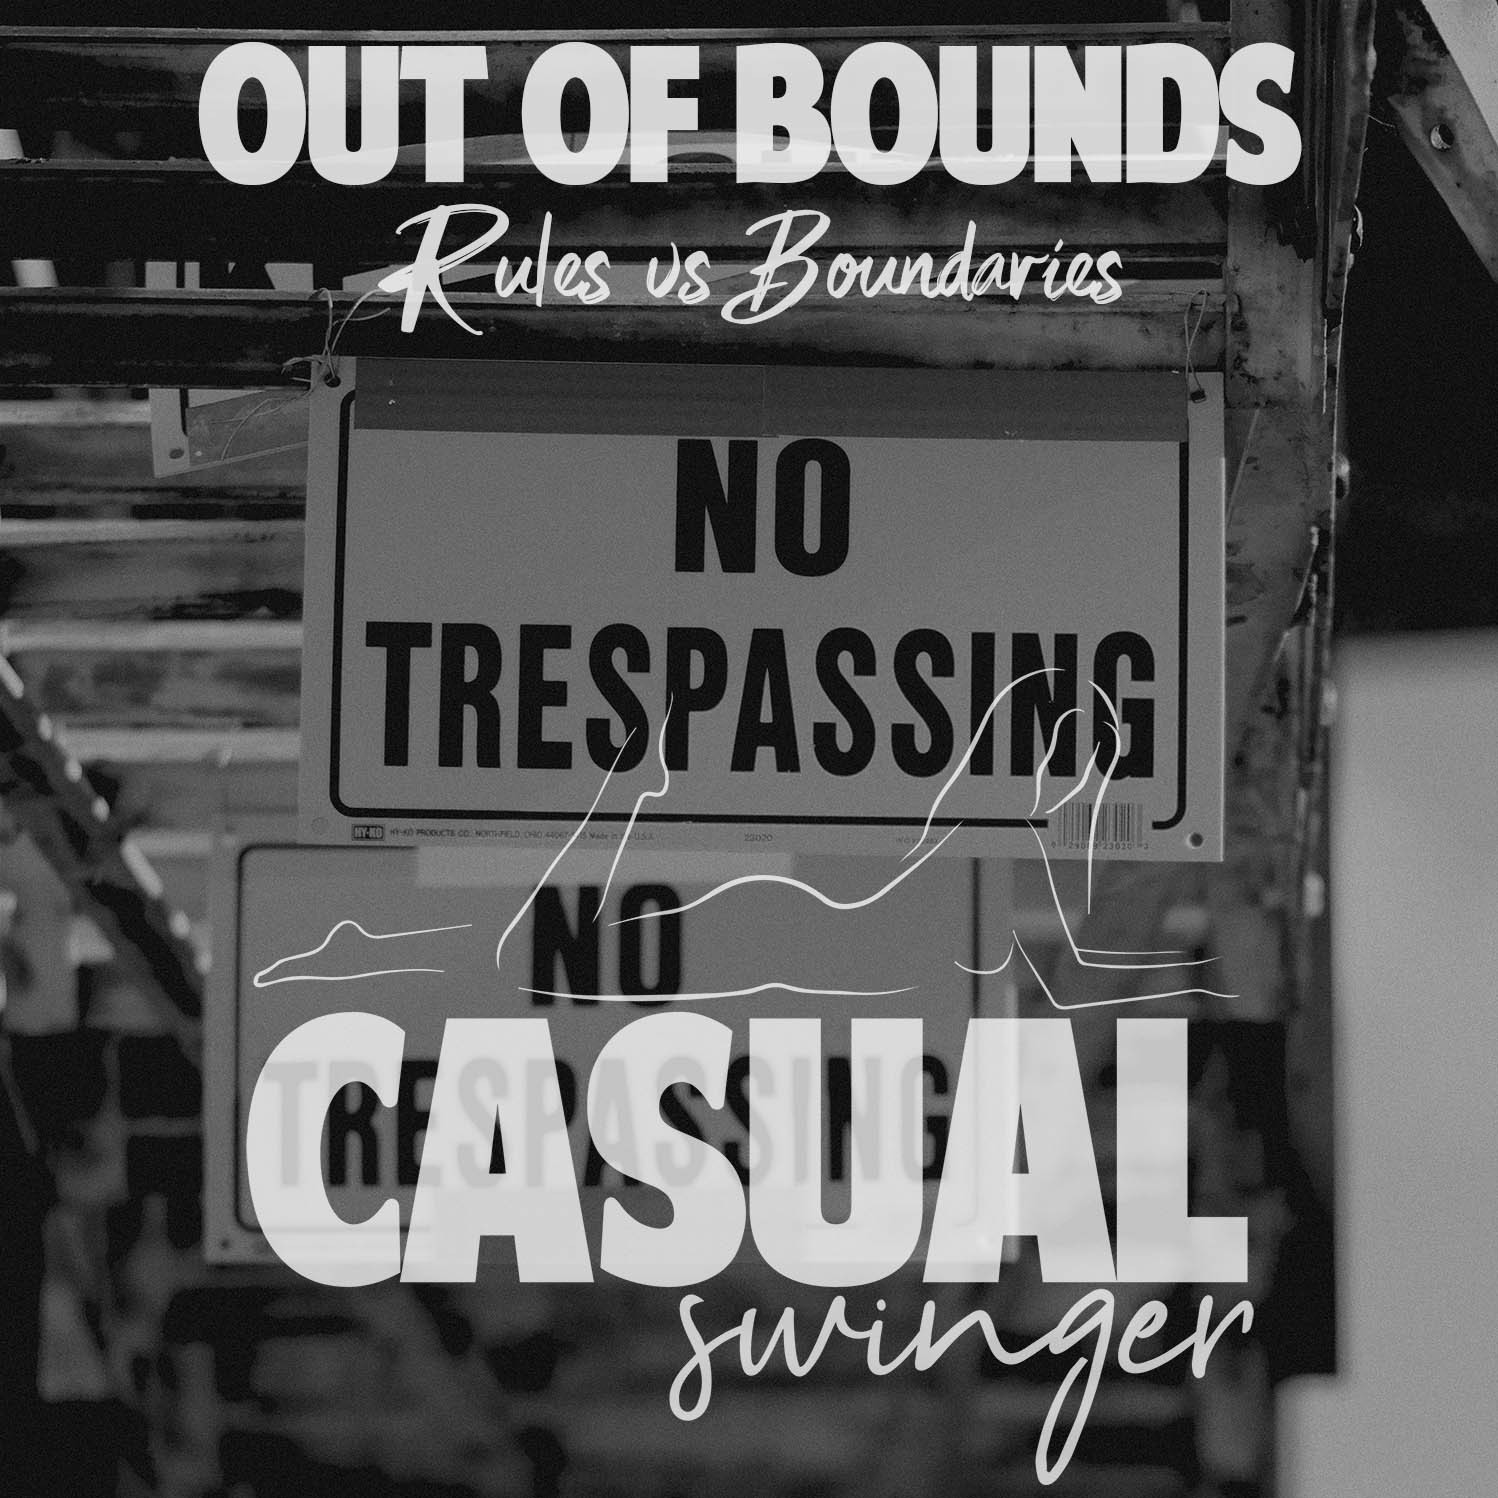 Out of Bounds - Rules vs Boundaries in the Lifestyle